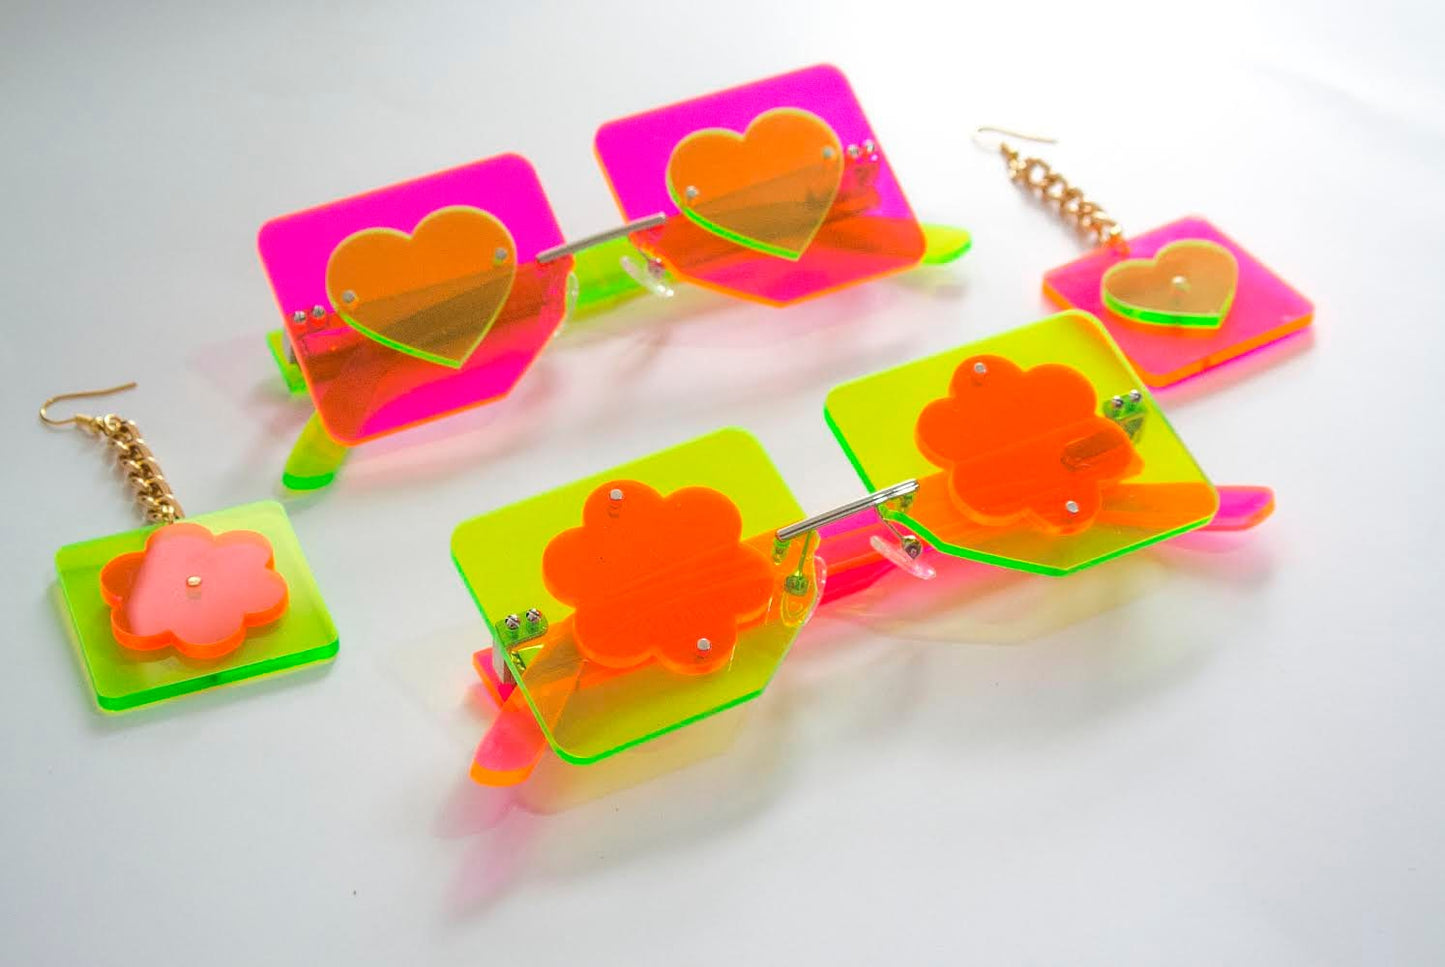 Groovy baby heart G_IRL Zine colab glasses